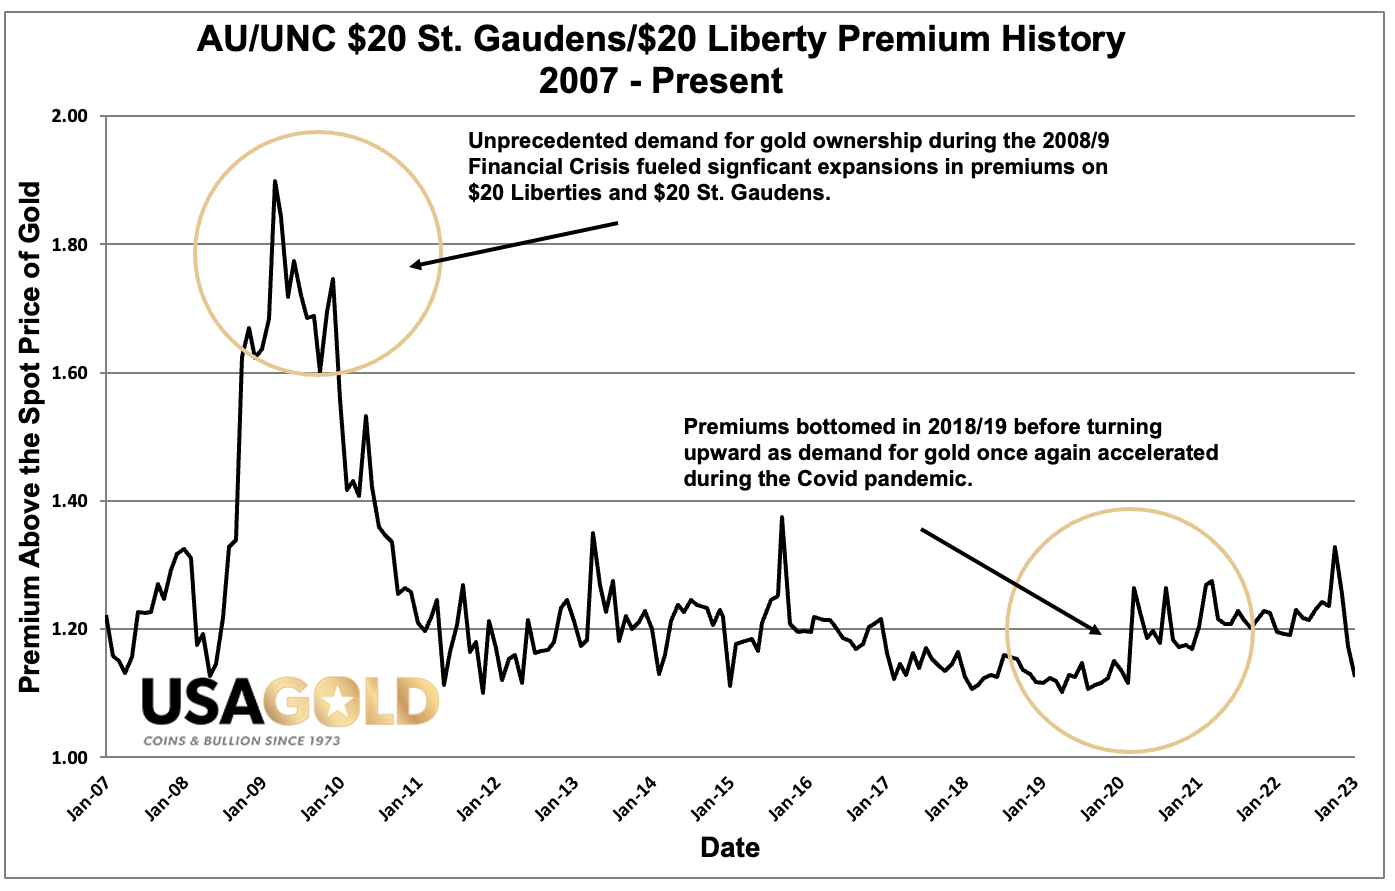 Graph of the premium history for Uncirculated $20 Liberties and St. Gaudens over a fifteen year period.